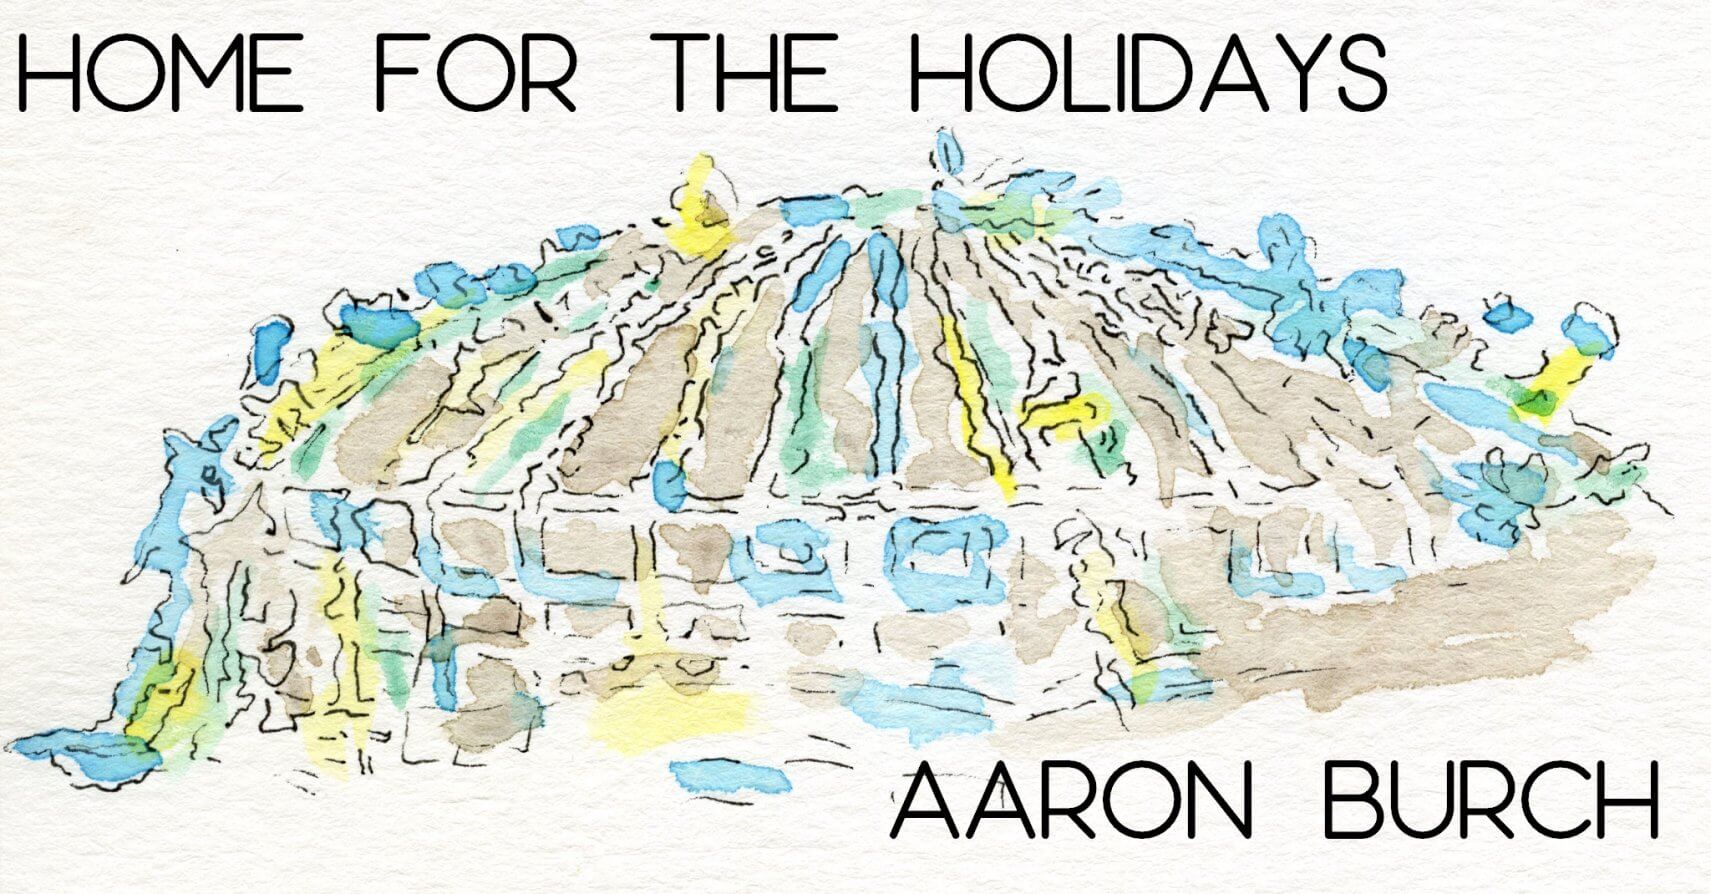 HOME FOR THE HOLIDAYS by Aaron Burch